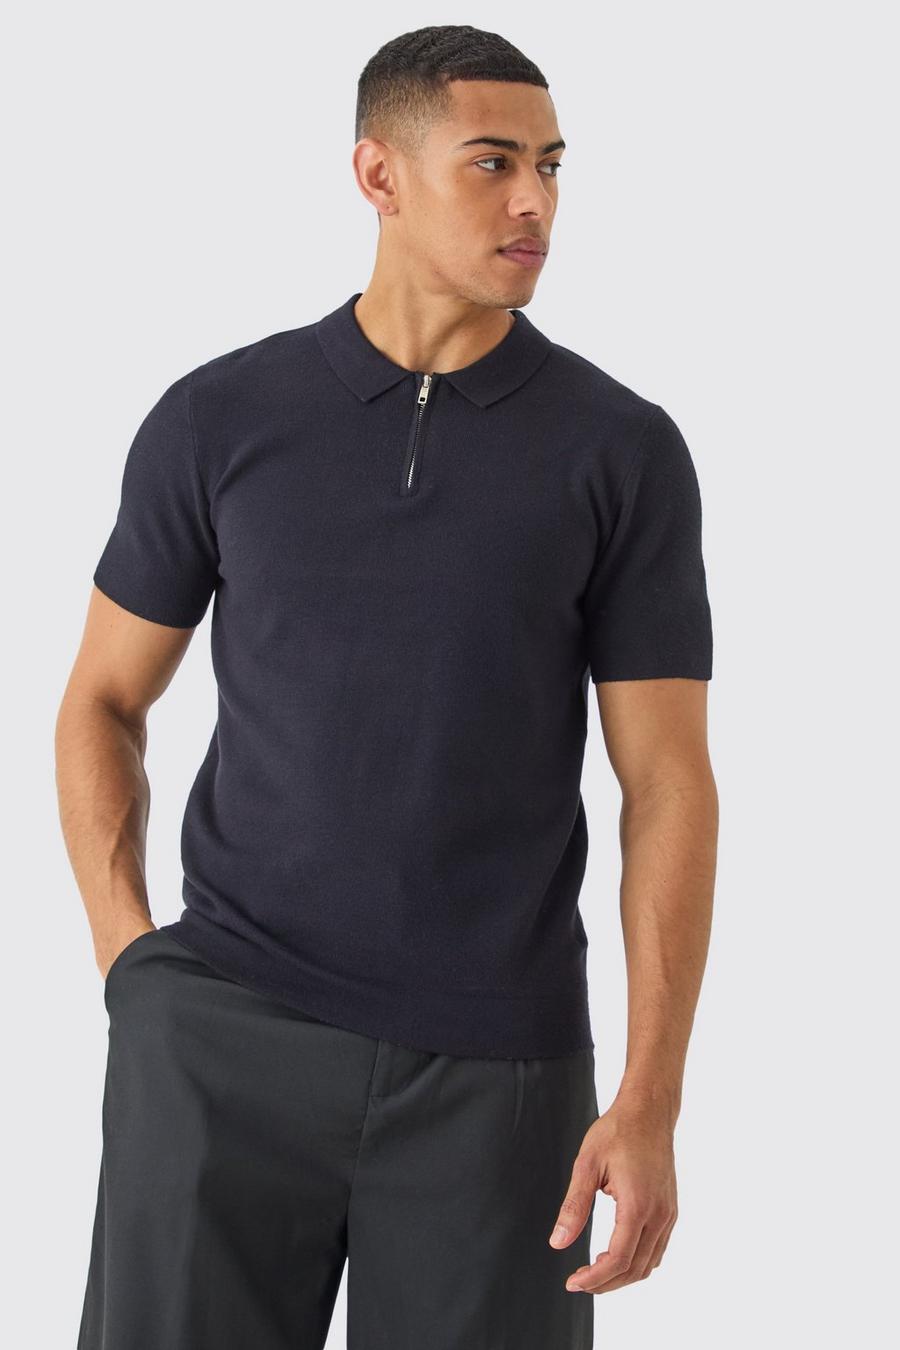 Black Regular Fit 1/4 Zip Knitted Polo